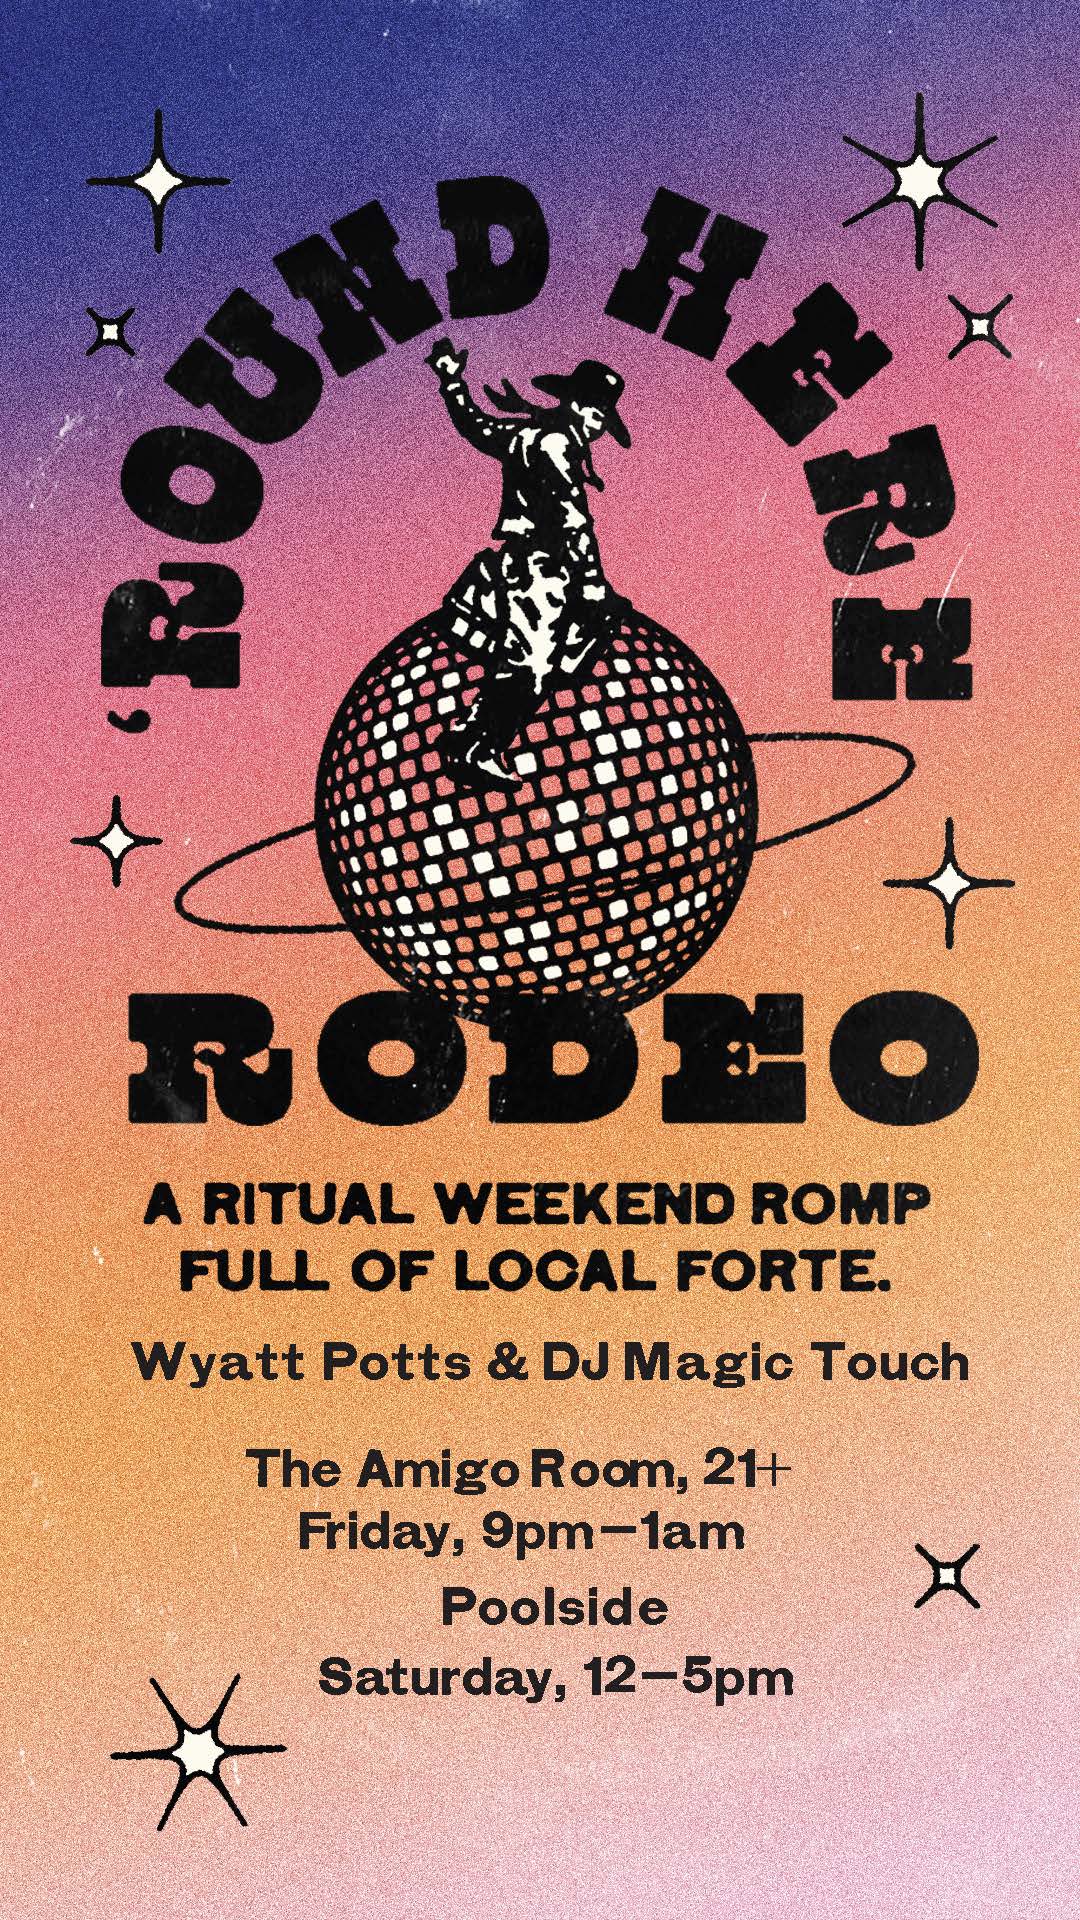 Round here rodeo flier for Wyatt Potts and DJ Magic Touch